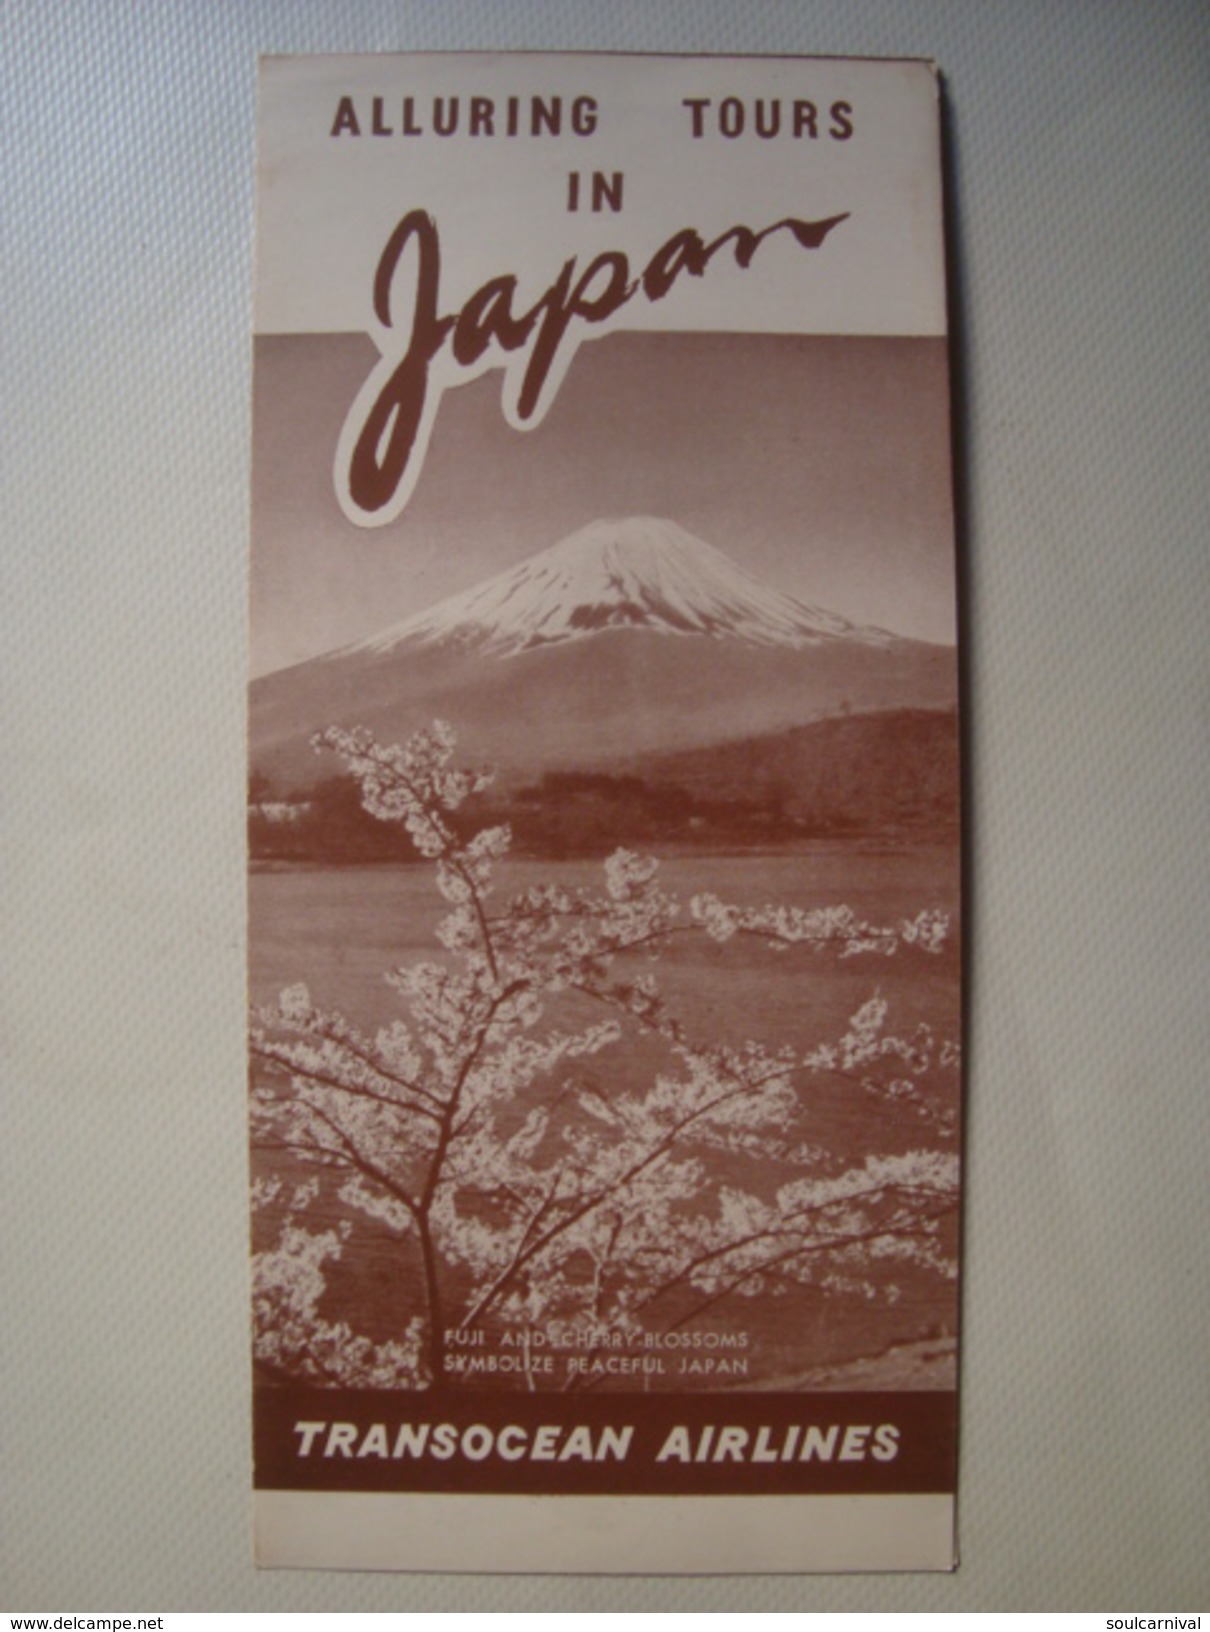 ALLURING TOURS IN JAPAN. TRANSOCEAN AIRLINES. FUJI CHERRY-BLOSSOMS PEACEFUL JAPAN - 1950 APROX. MADE IN OCCUPIED JAPAN. - Advertenties